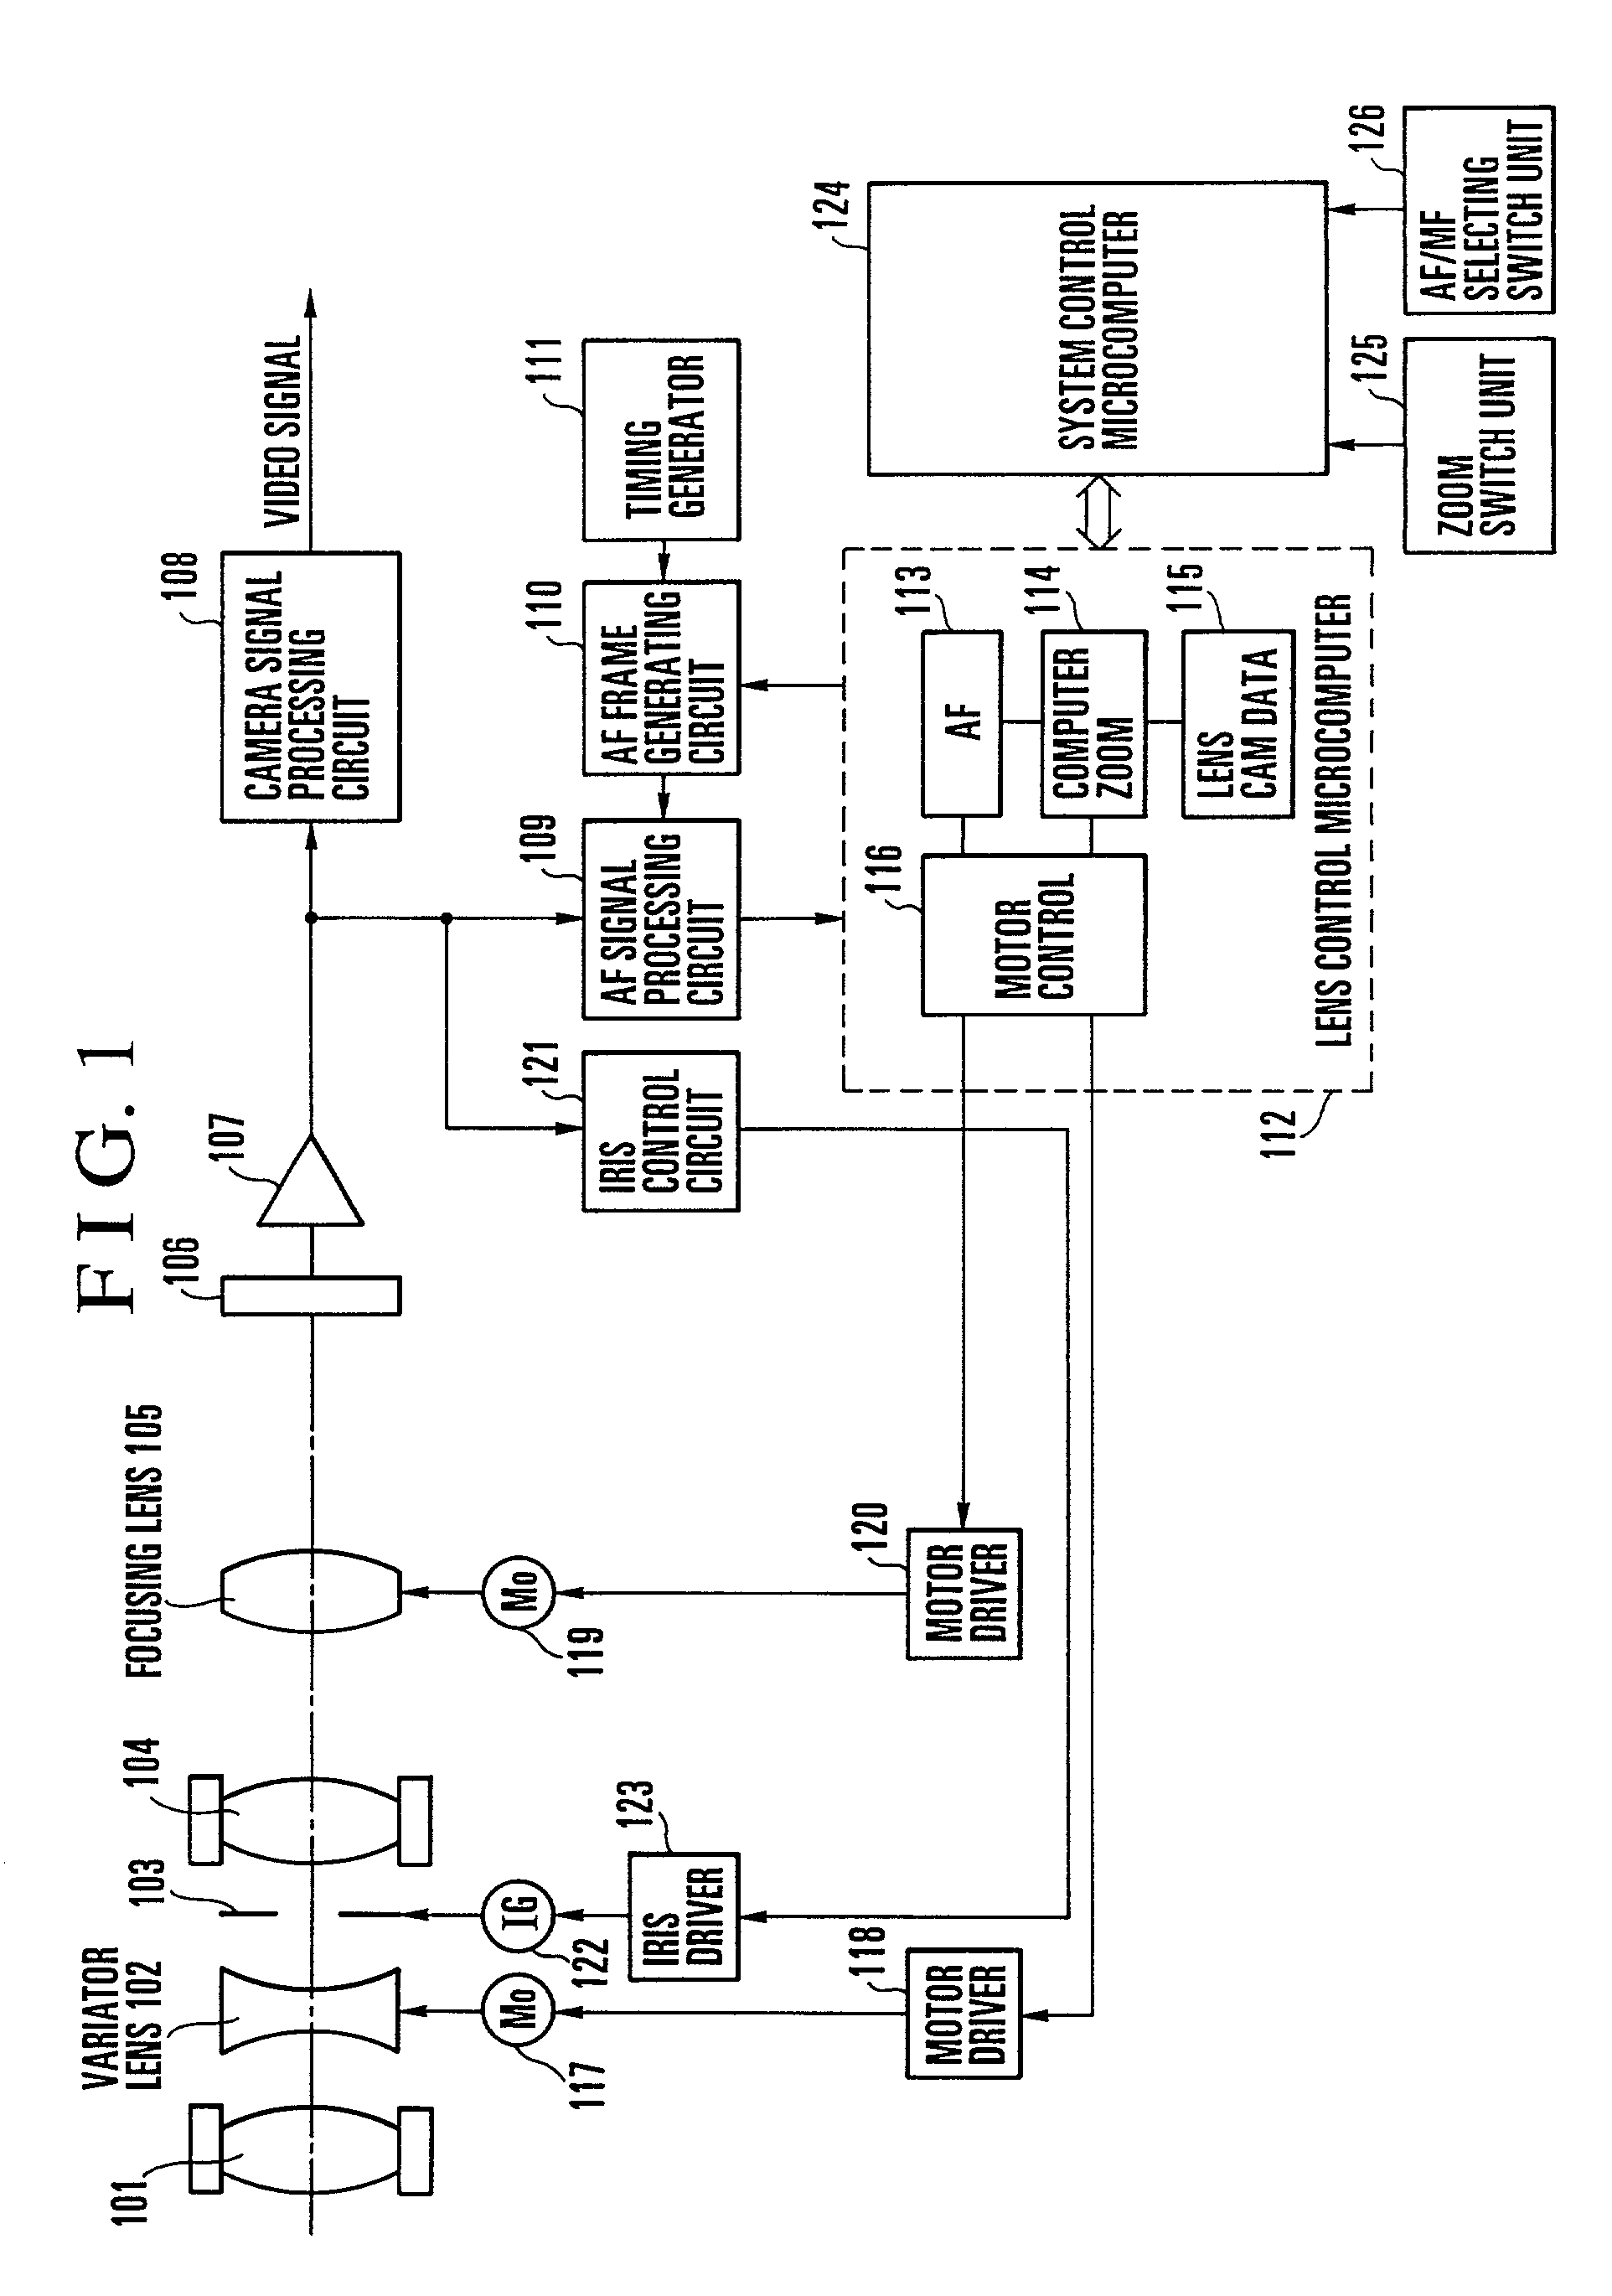 Image pickup apparatus with focusing lens control device